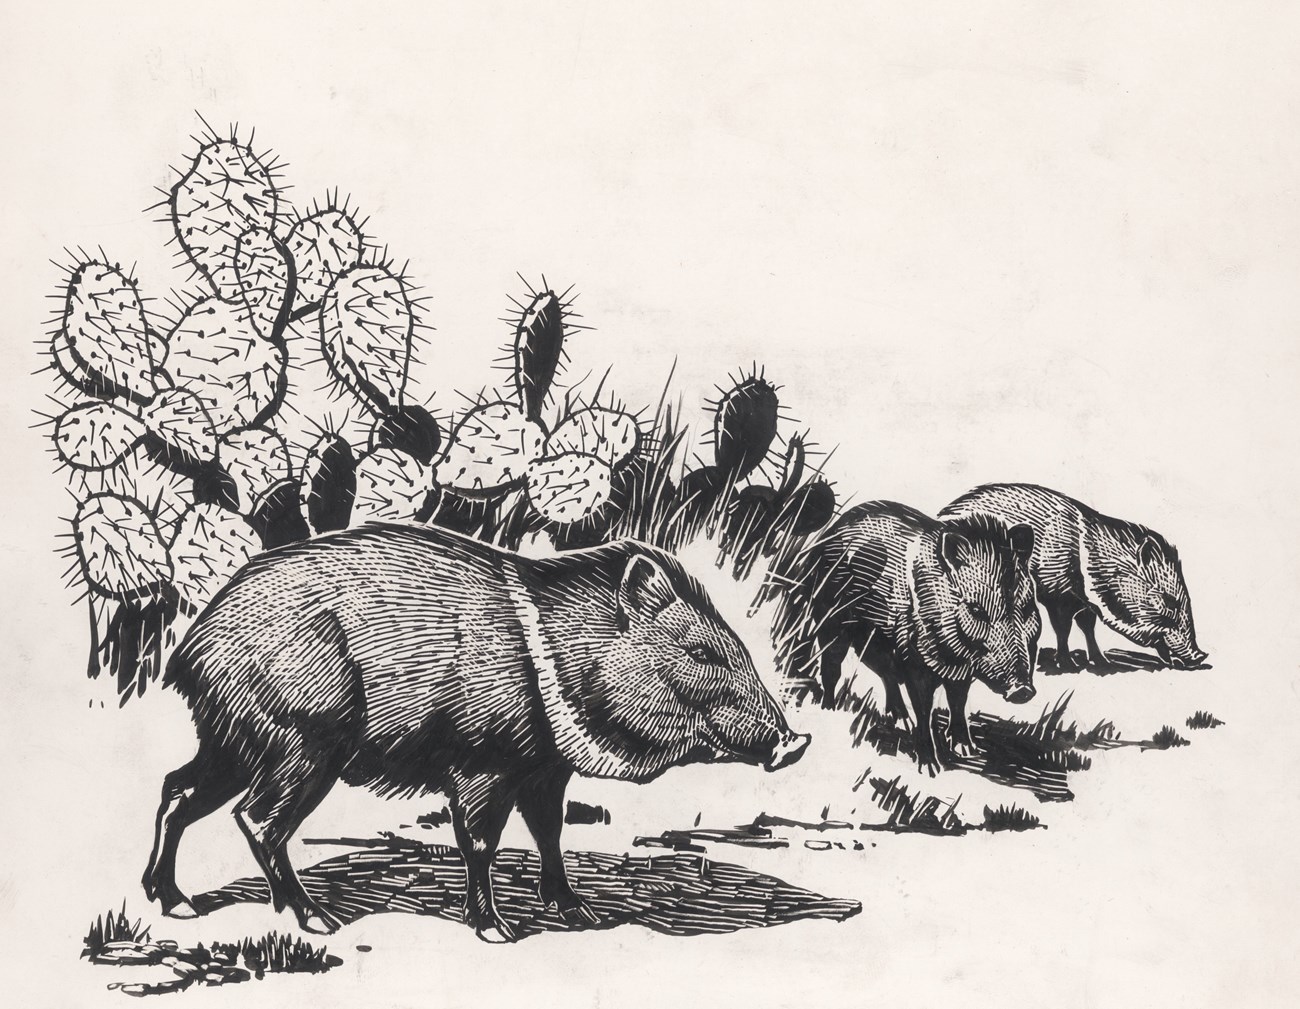 Pen-and-ink drawing of three peccary and a cactus